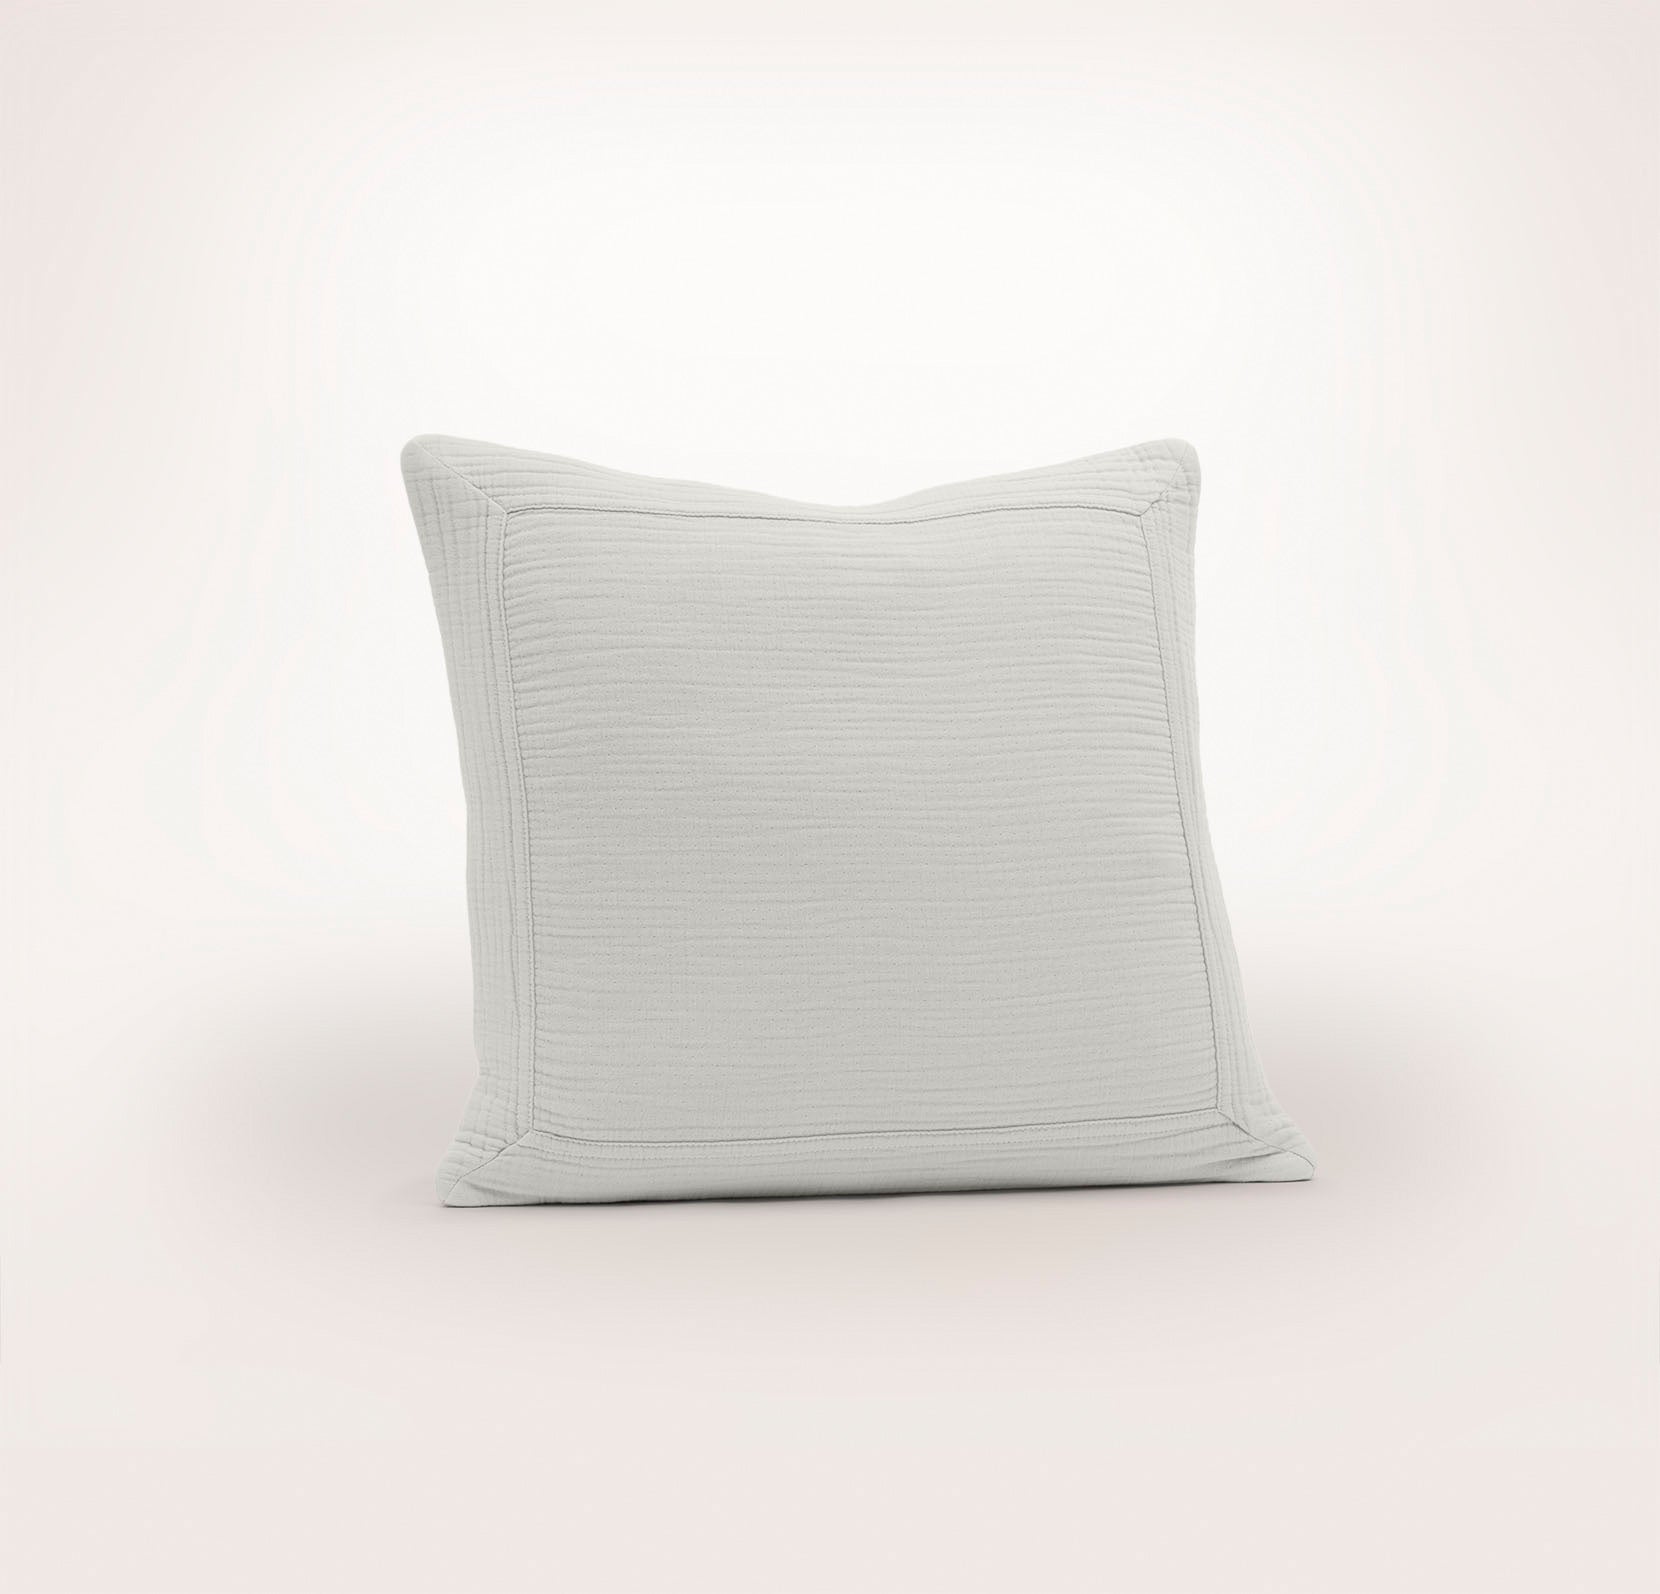 Dream Pillow Cover (20x20) in Mist